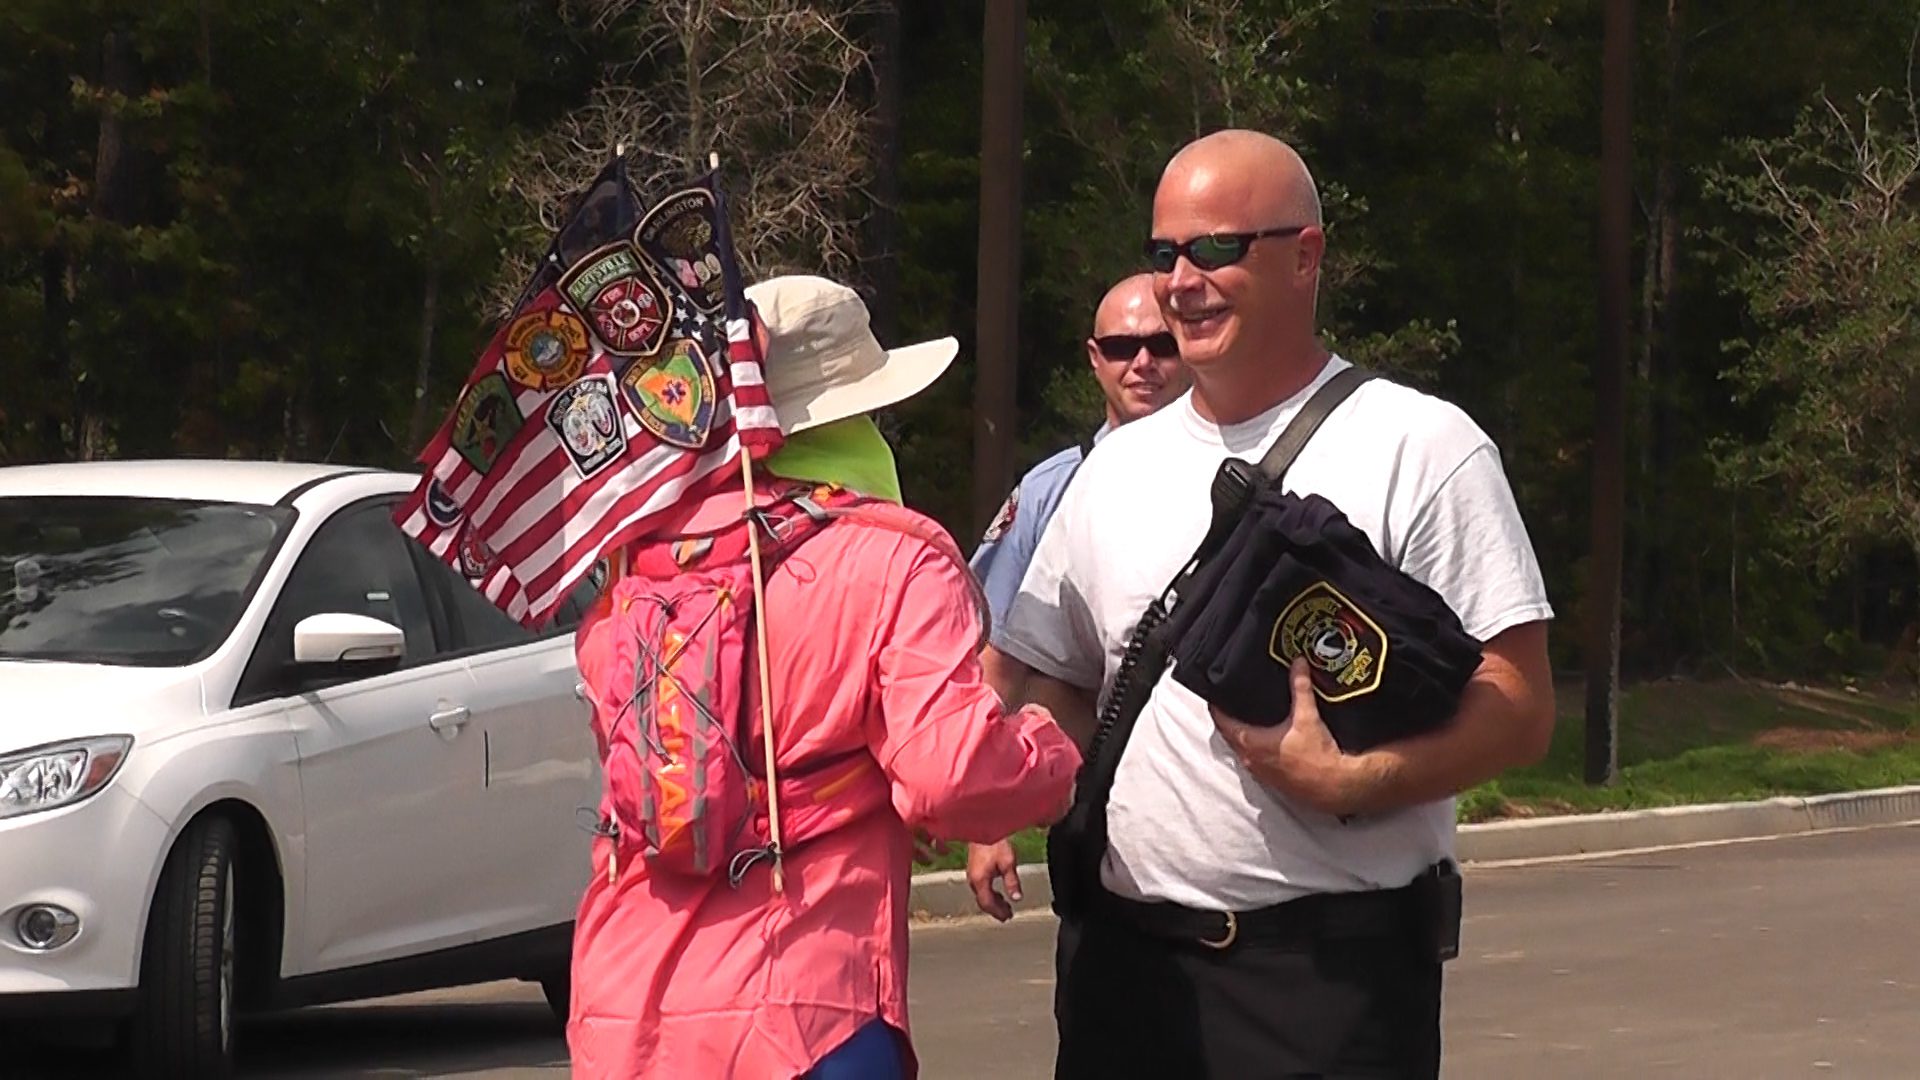 Pictured: Captain Todd Pruitt with the Goose Creek Fire Department welcomes Anna into town.